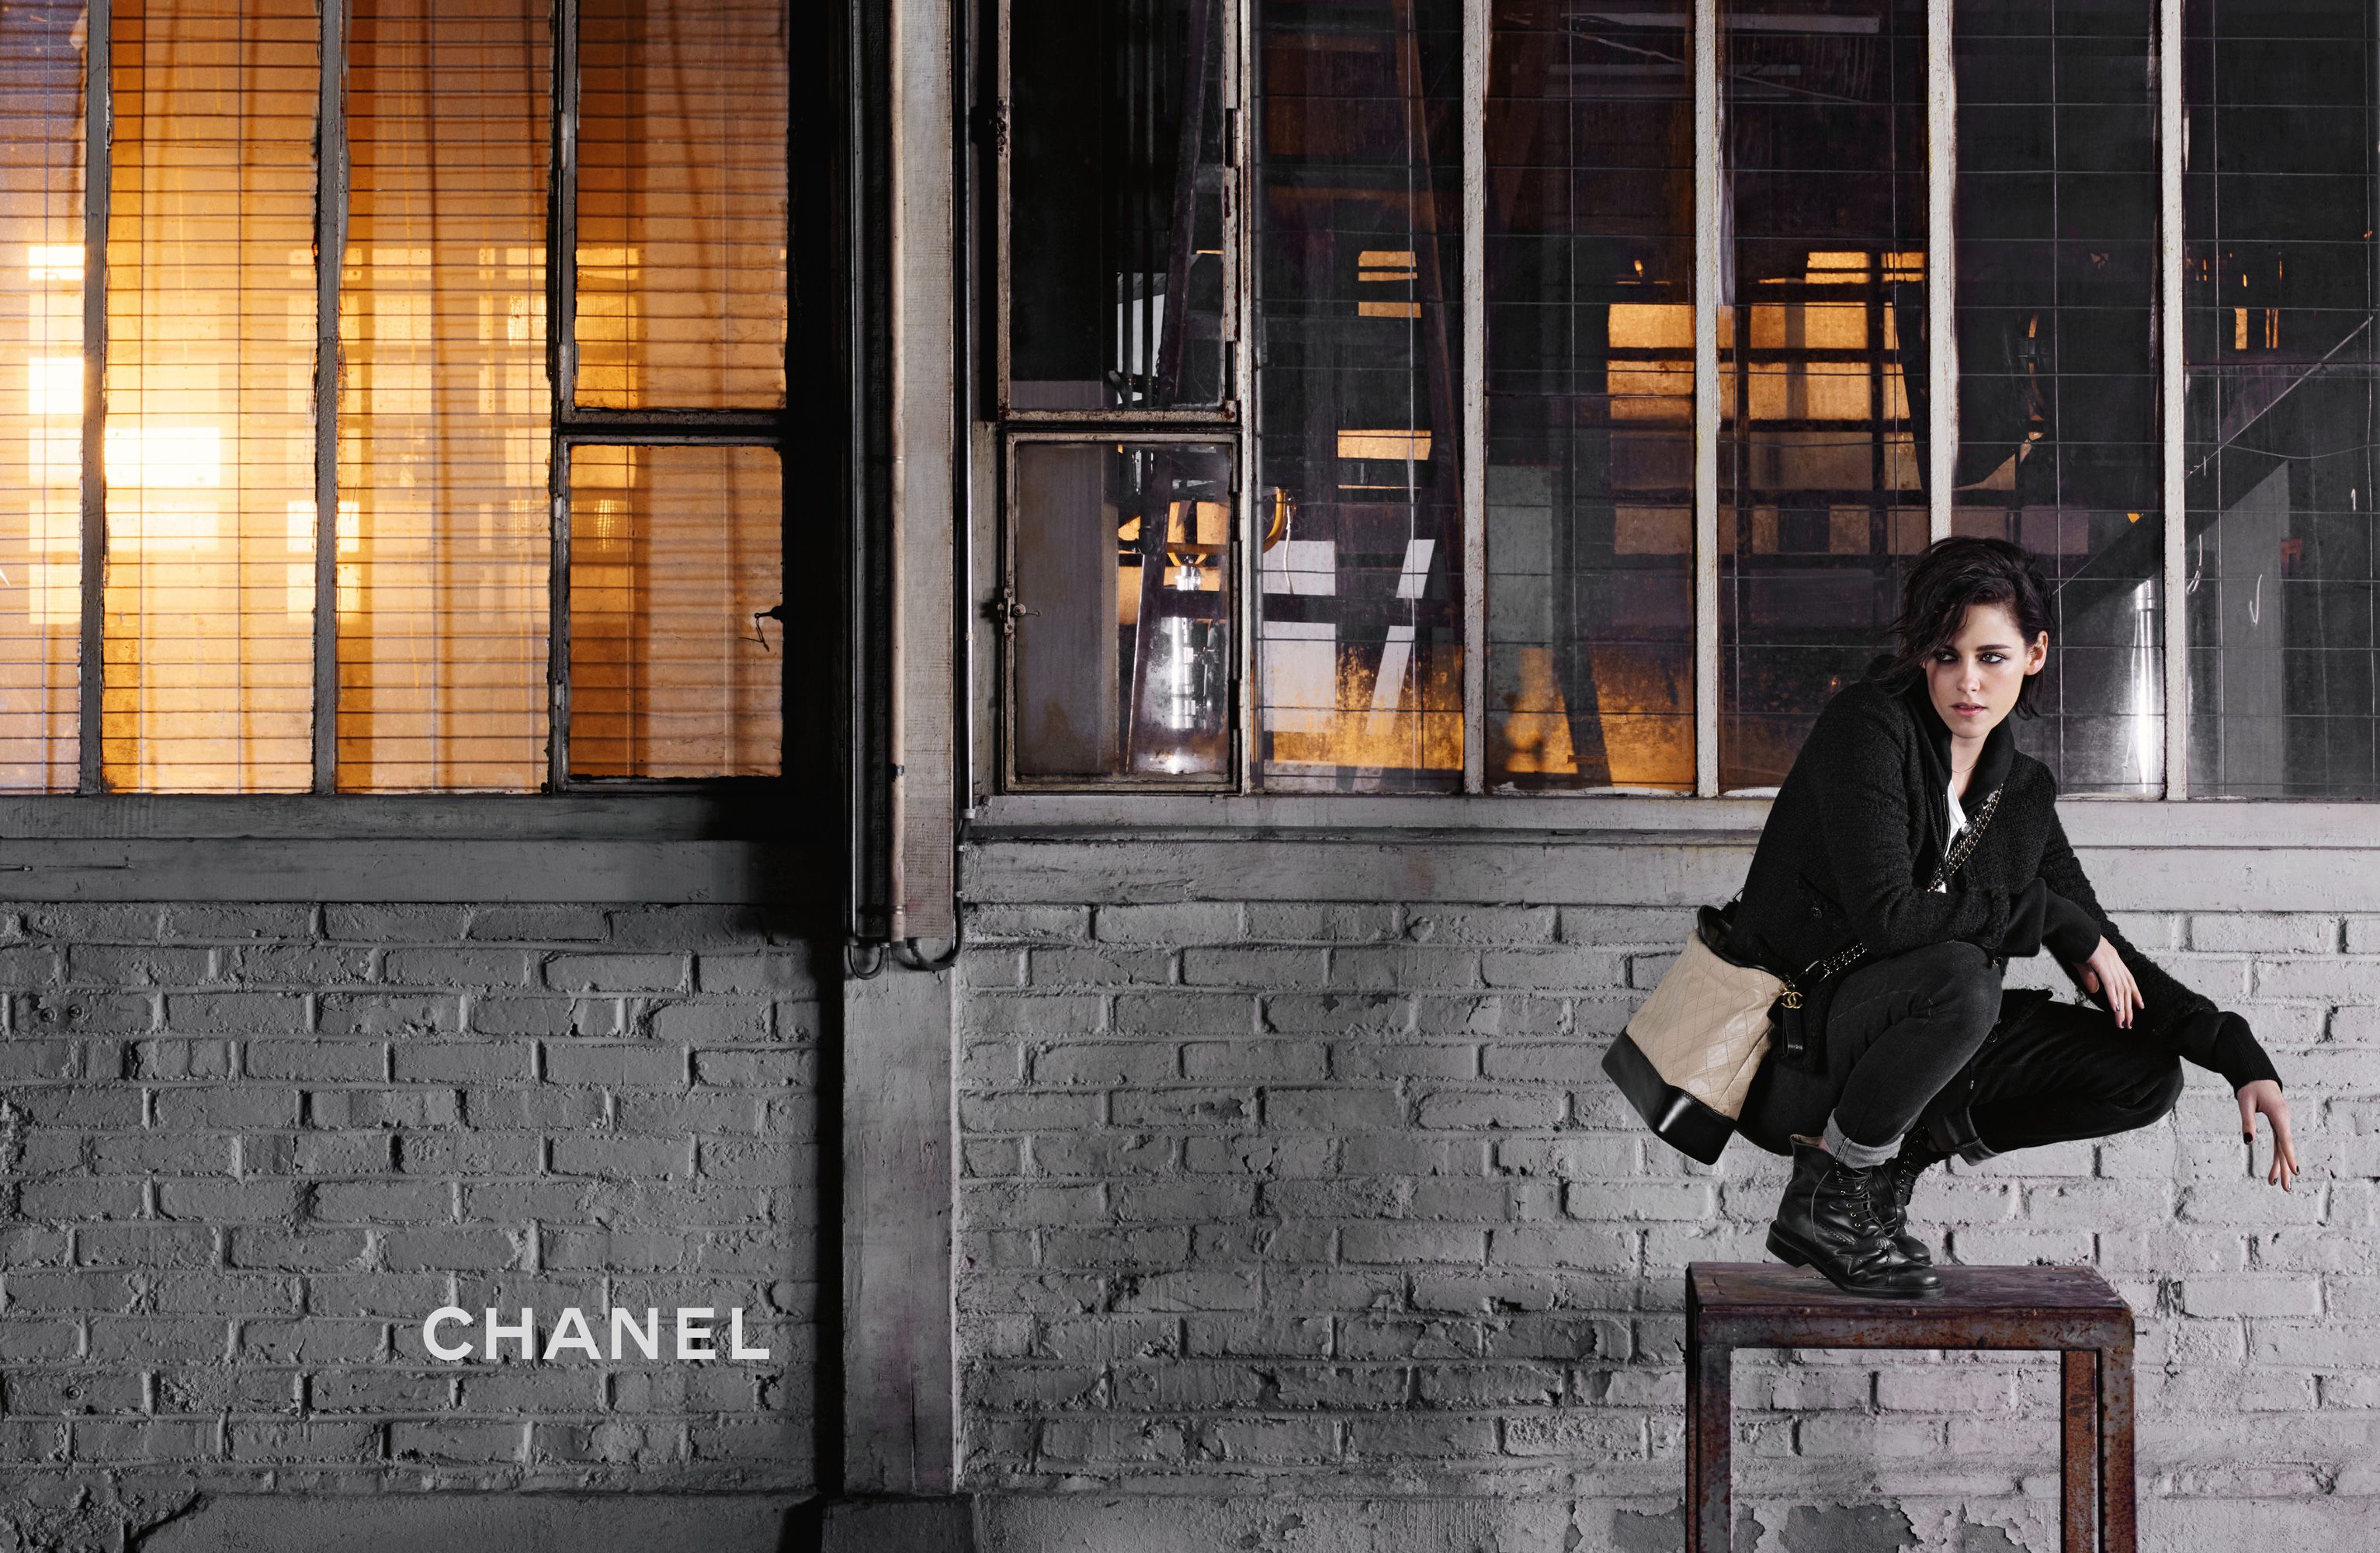 Kristen Steward's Surprising Dance Moves In The New Chanel Ad Film